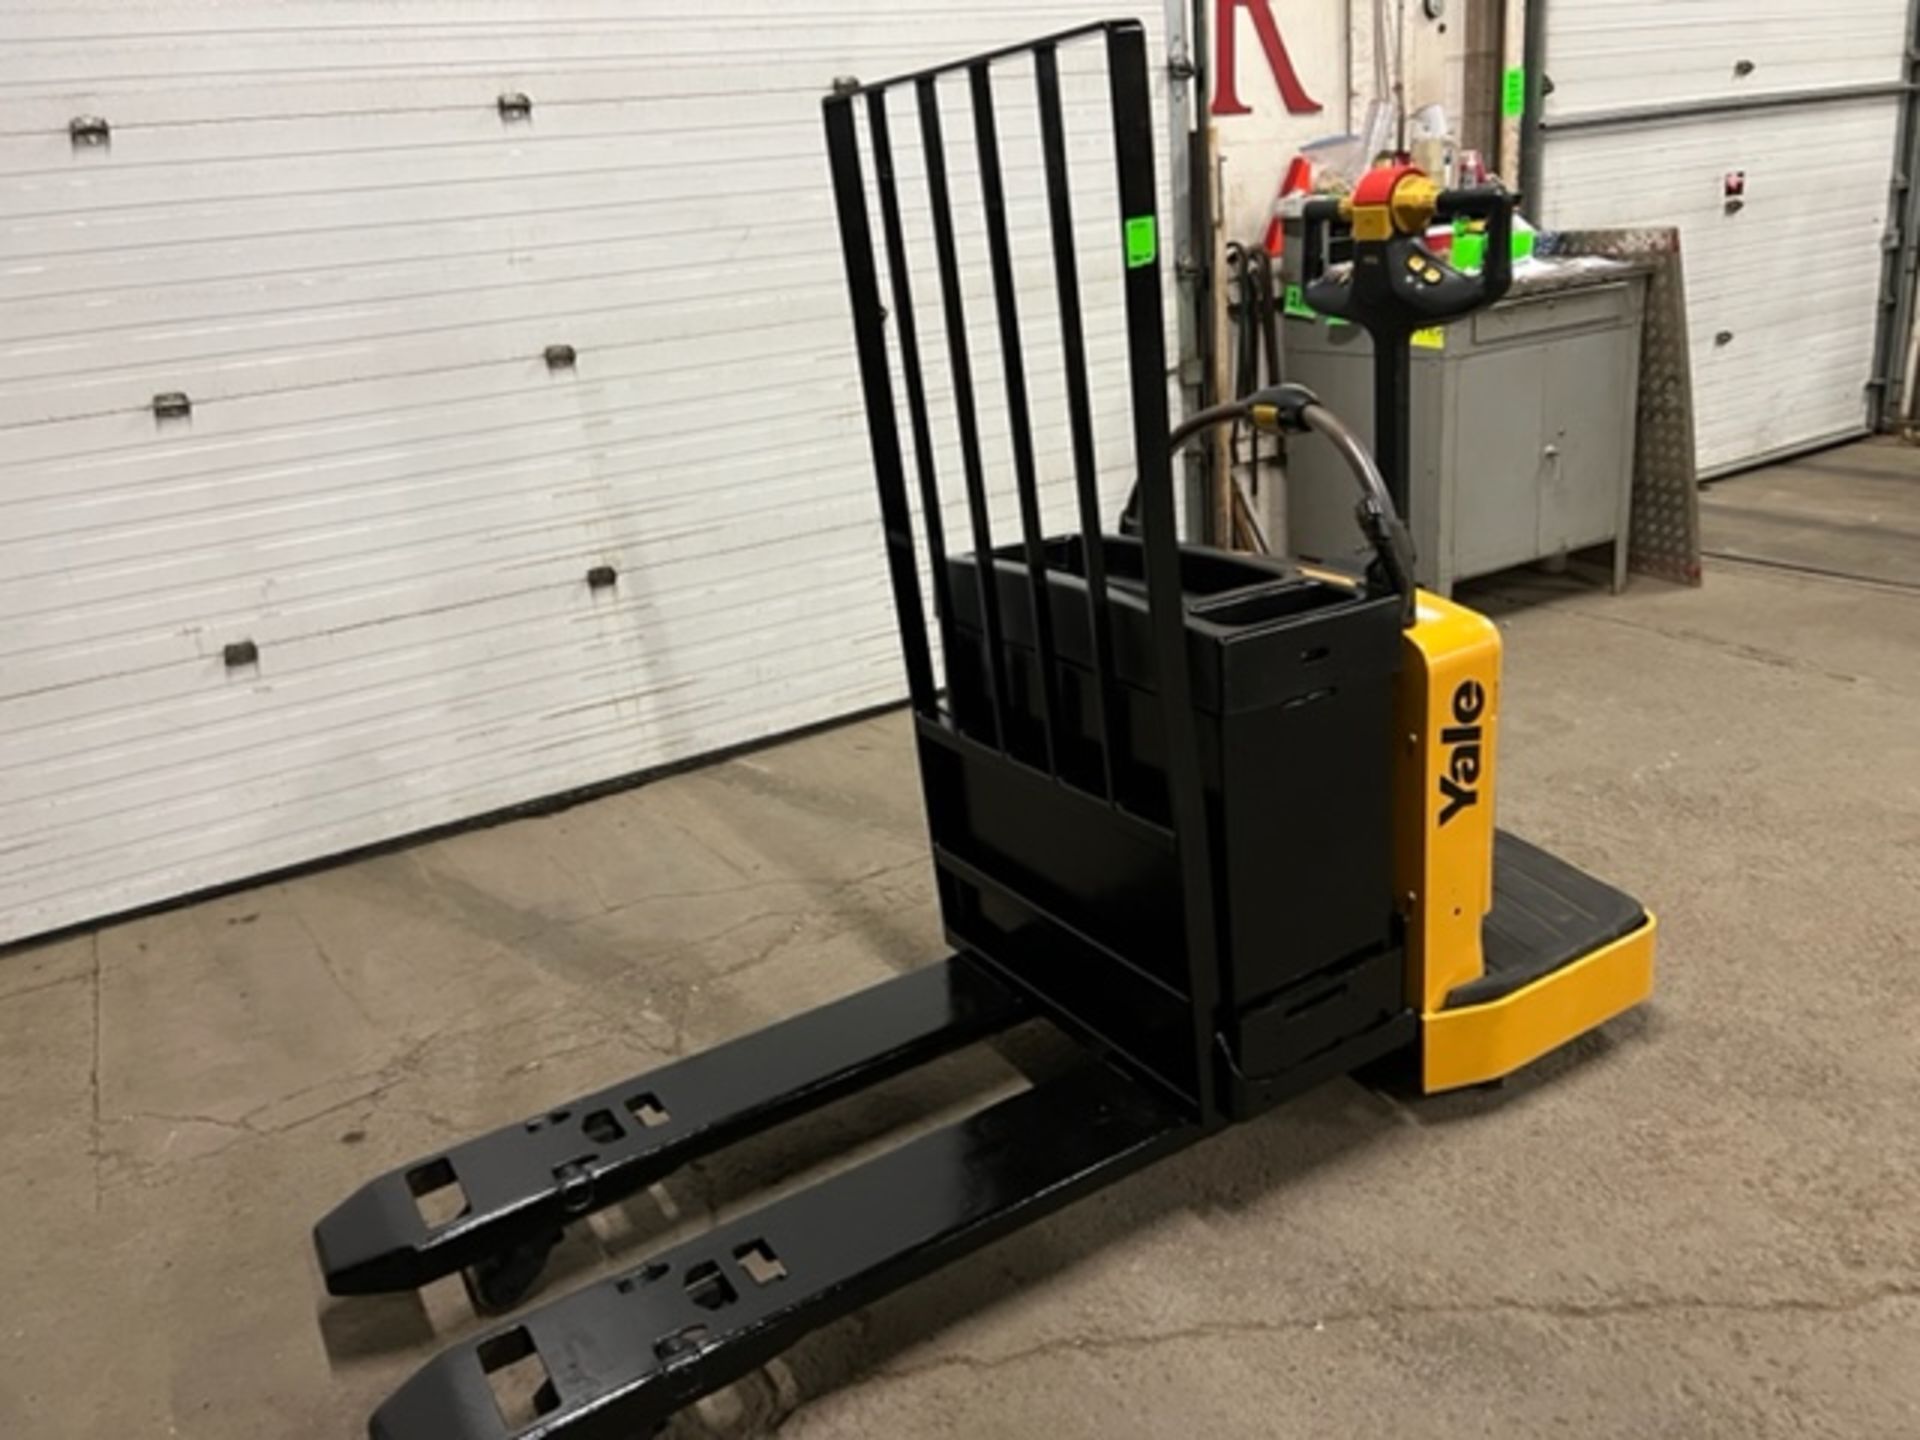 Yale RIDE ON 6500lbs capacity Powered Pallet Cart Lift Ride on Walkie unit with LOW HOURS - Image 2 of 3